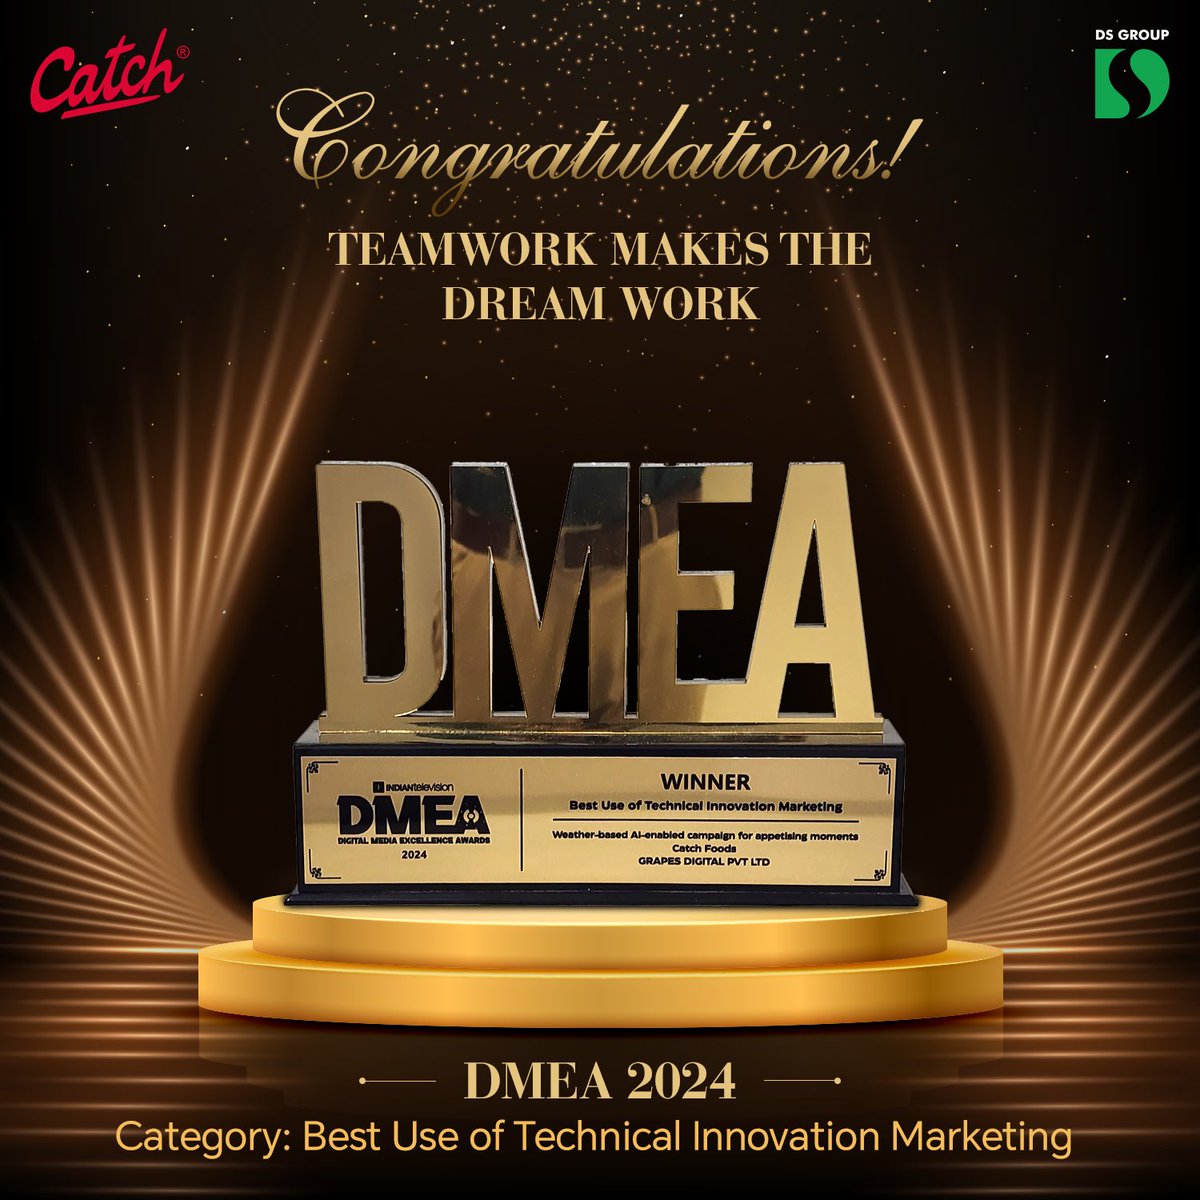 Proud moment for us! We've won the DMEA Award 2024! This incredible achievement is a testament to our dedication and hard work. Heartfelt thanks to our amazing team and supporters. Here's to many more milestones.

#CatchFoods #Indianfood #DMEA #Award
#KyunkiKhanaSirfKhanaNahiHota